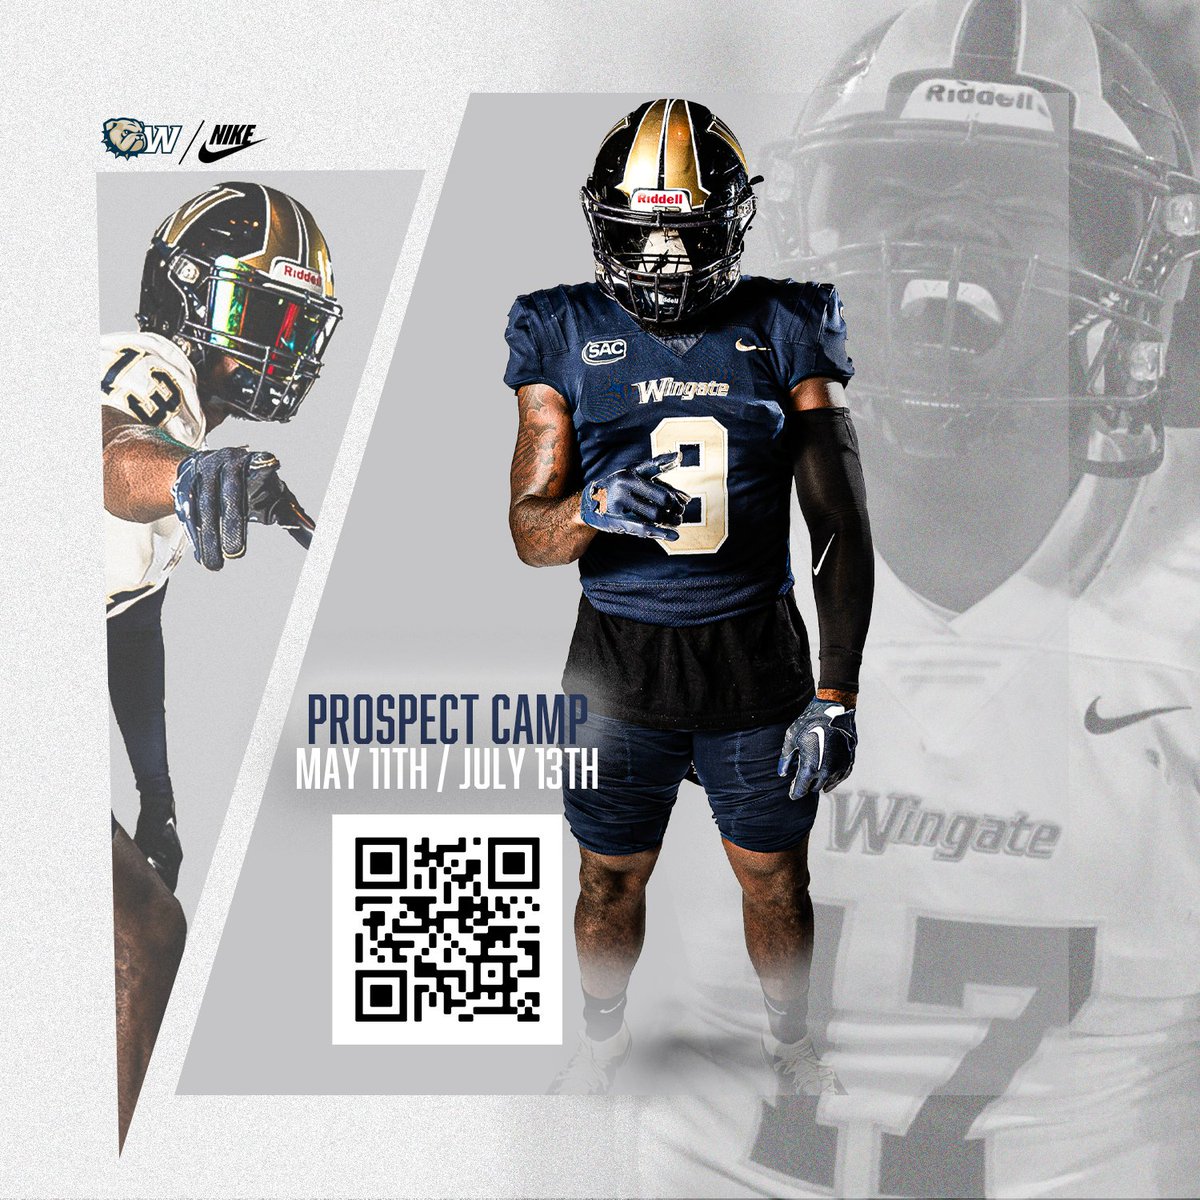 Don't miss your chance to show us what you got! Wingate Prospect Camp registration is still open! Use the link or QR code below to sign up. #OneDog May 11th & July 13th campscui.active.com/orgs/OneDogCam…